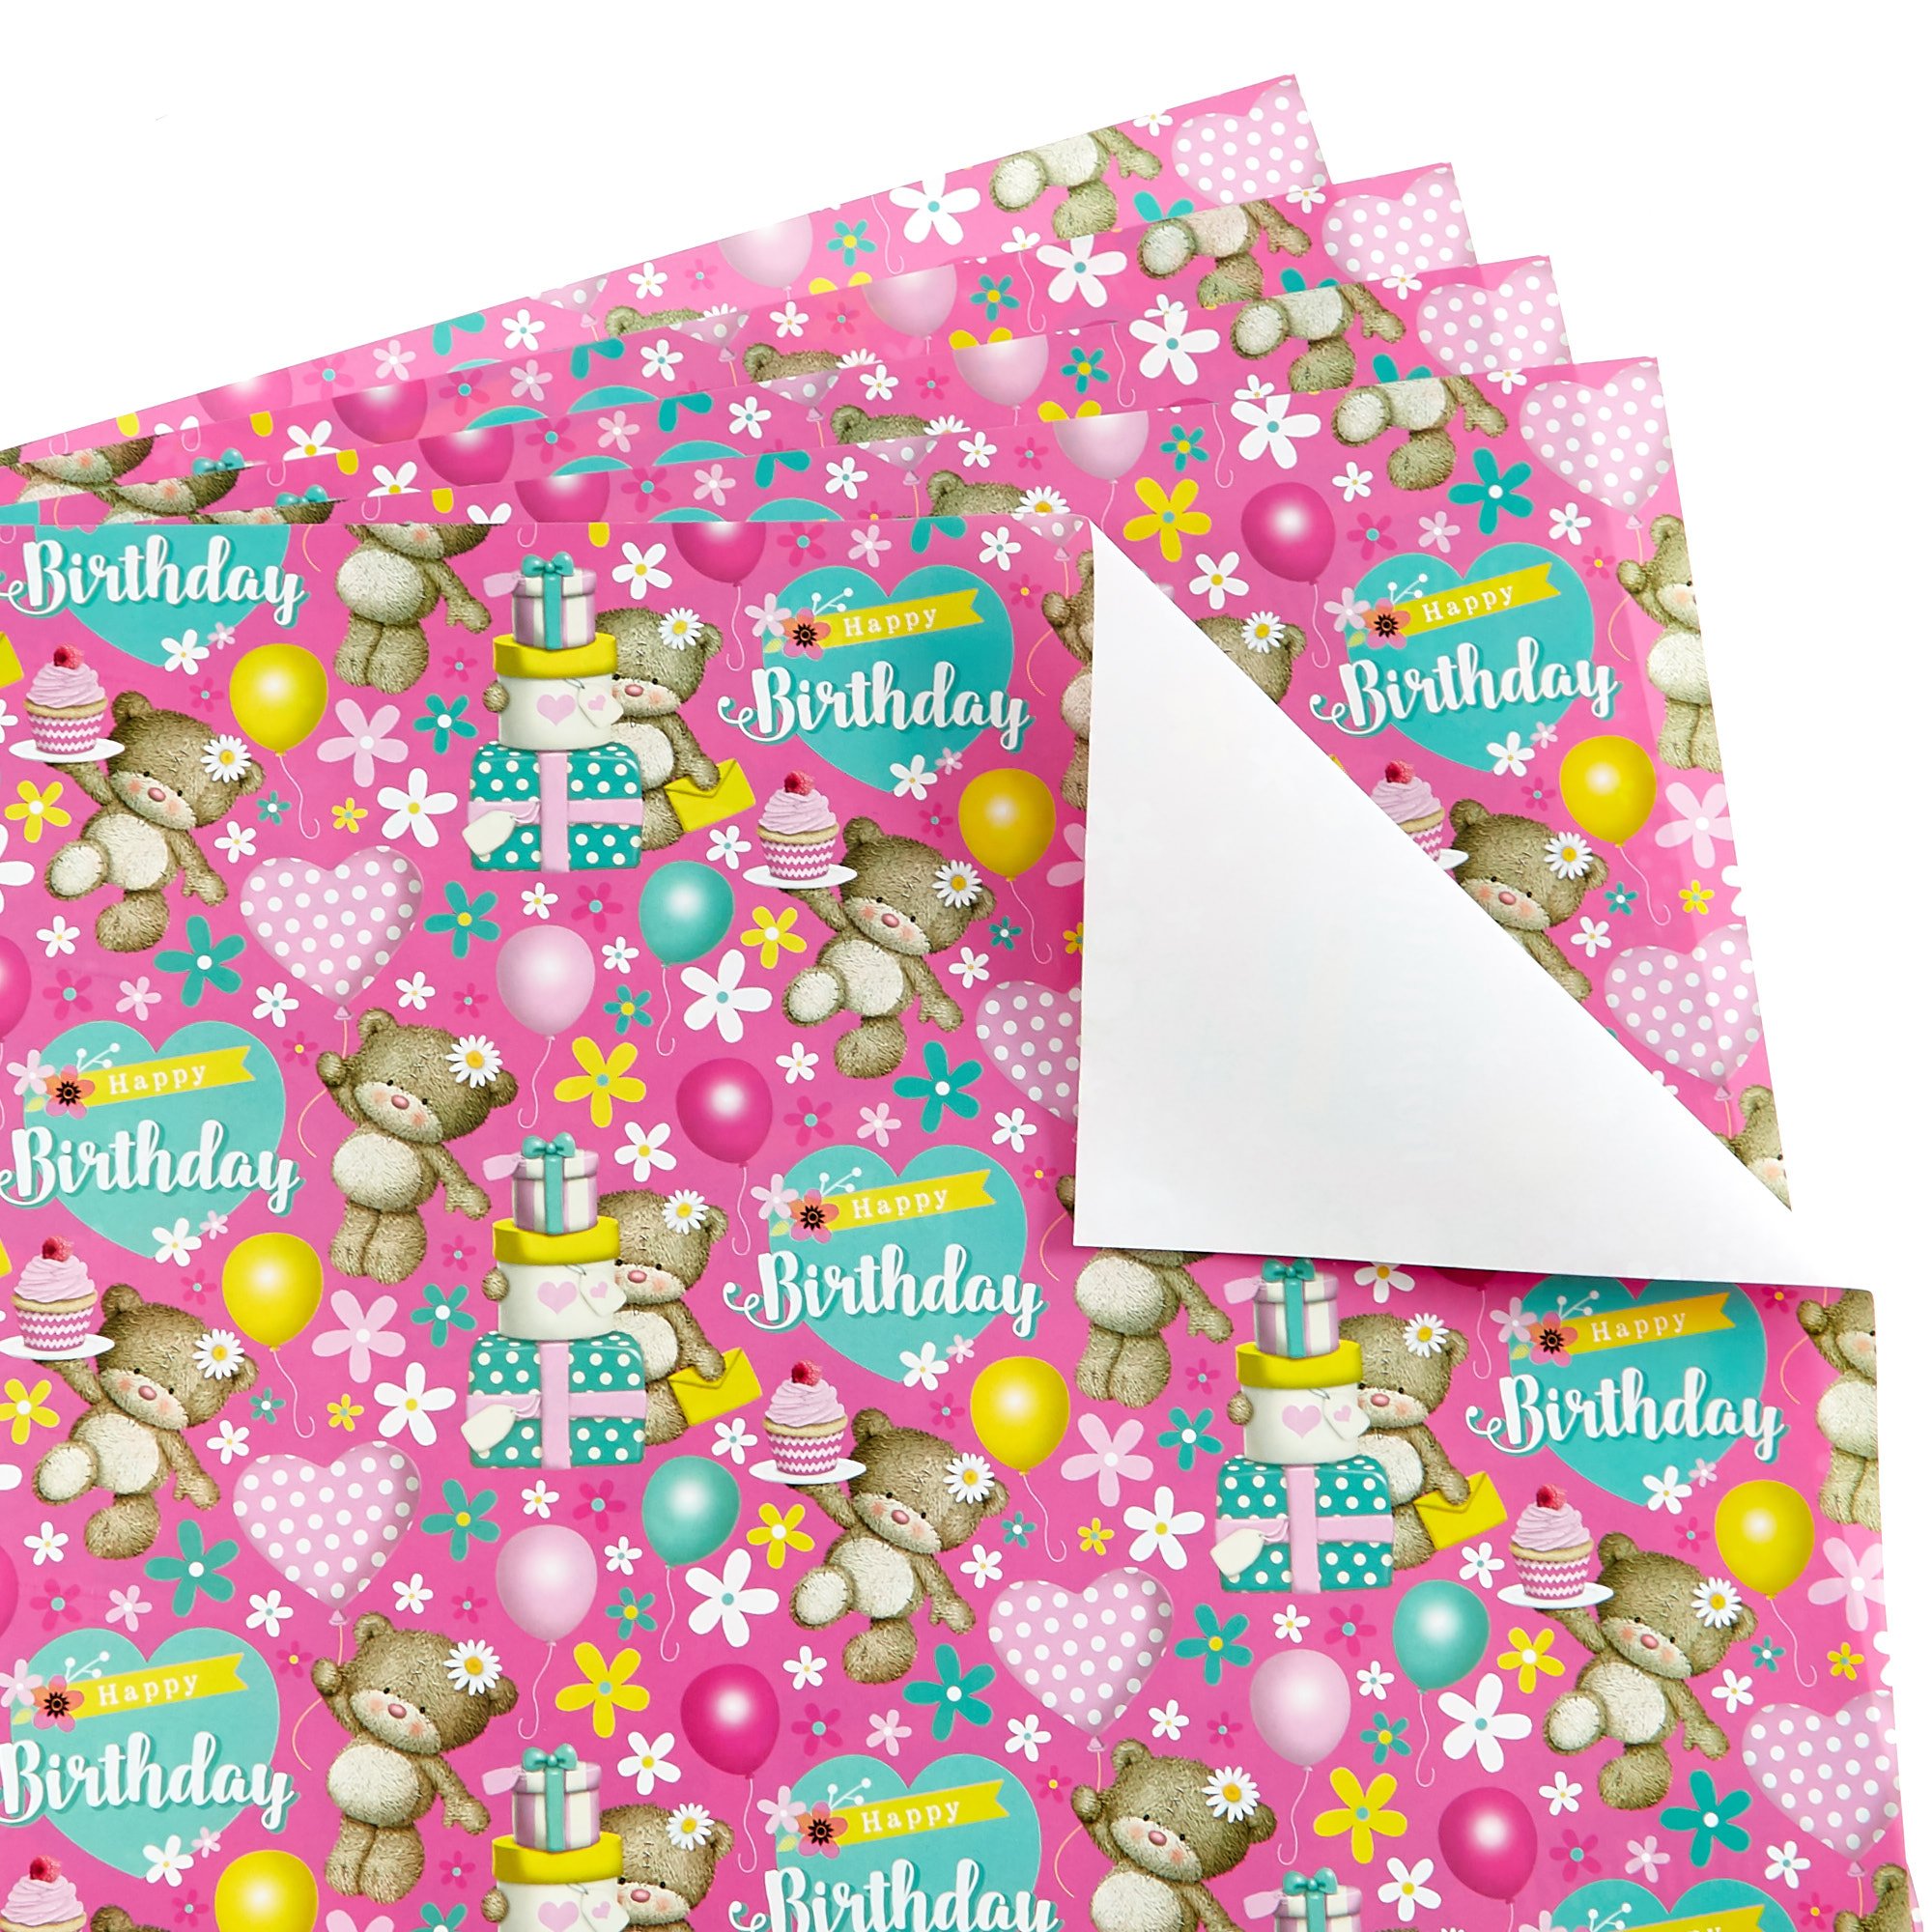 Hugs Pink Birthday Wrapping Paper - 24 Sheets